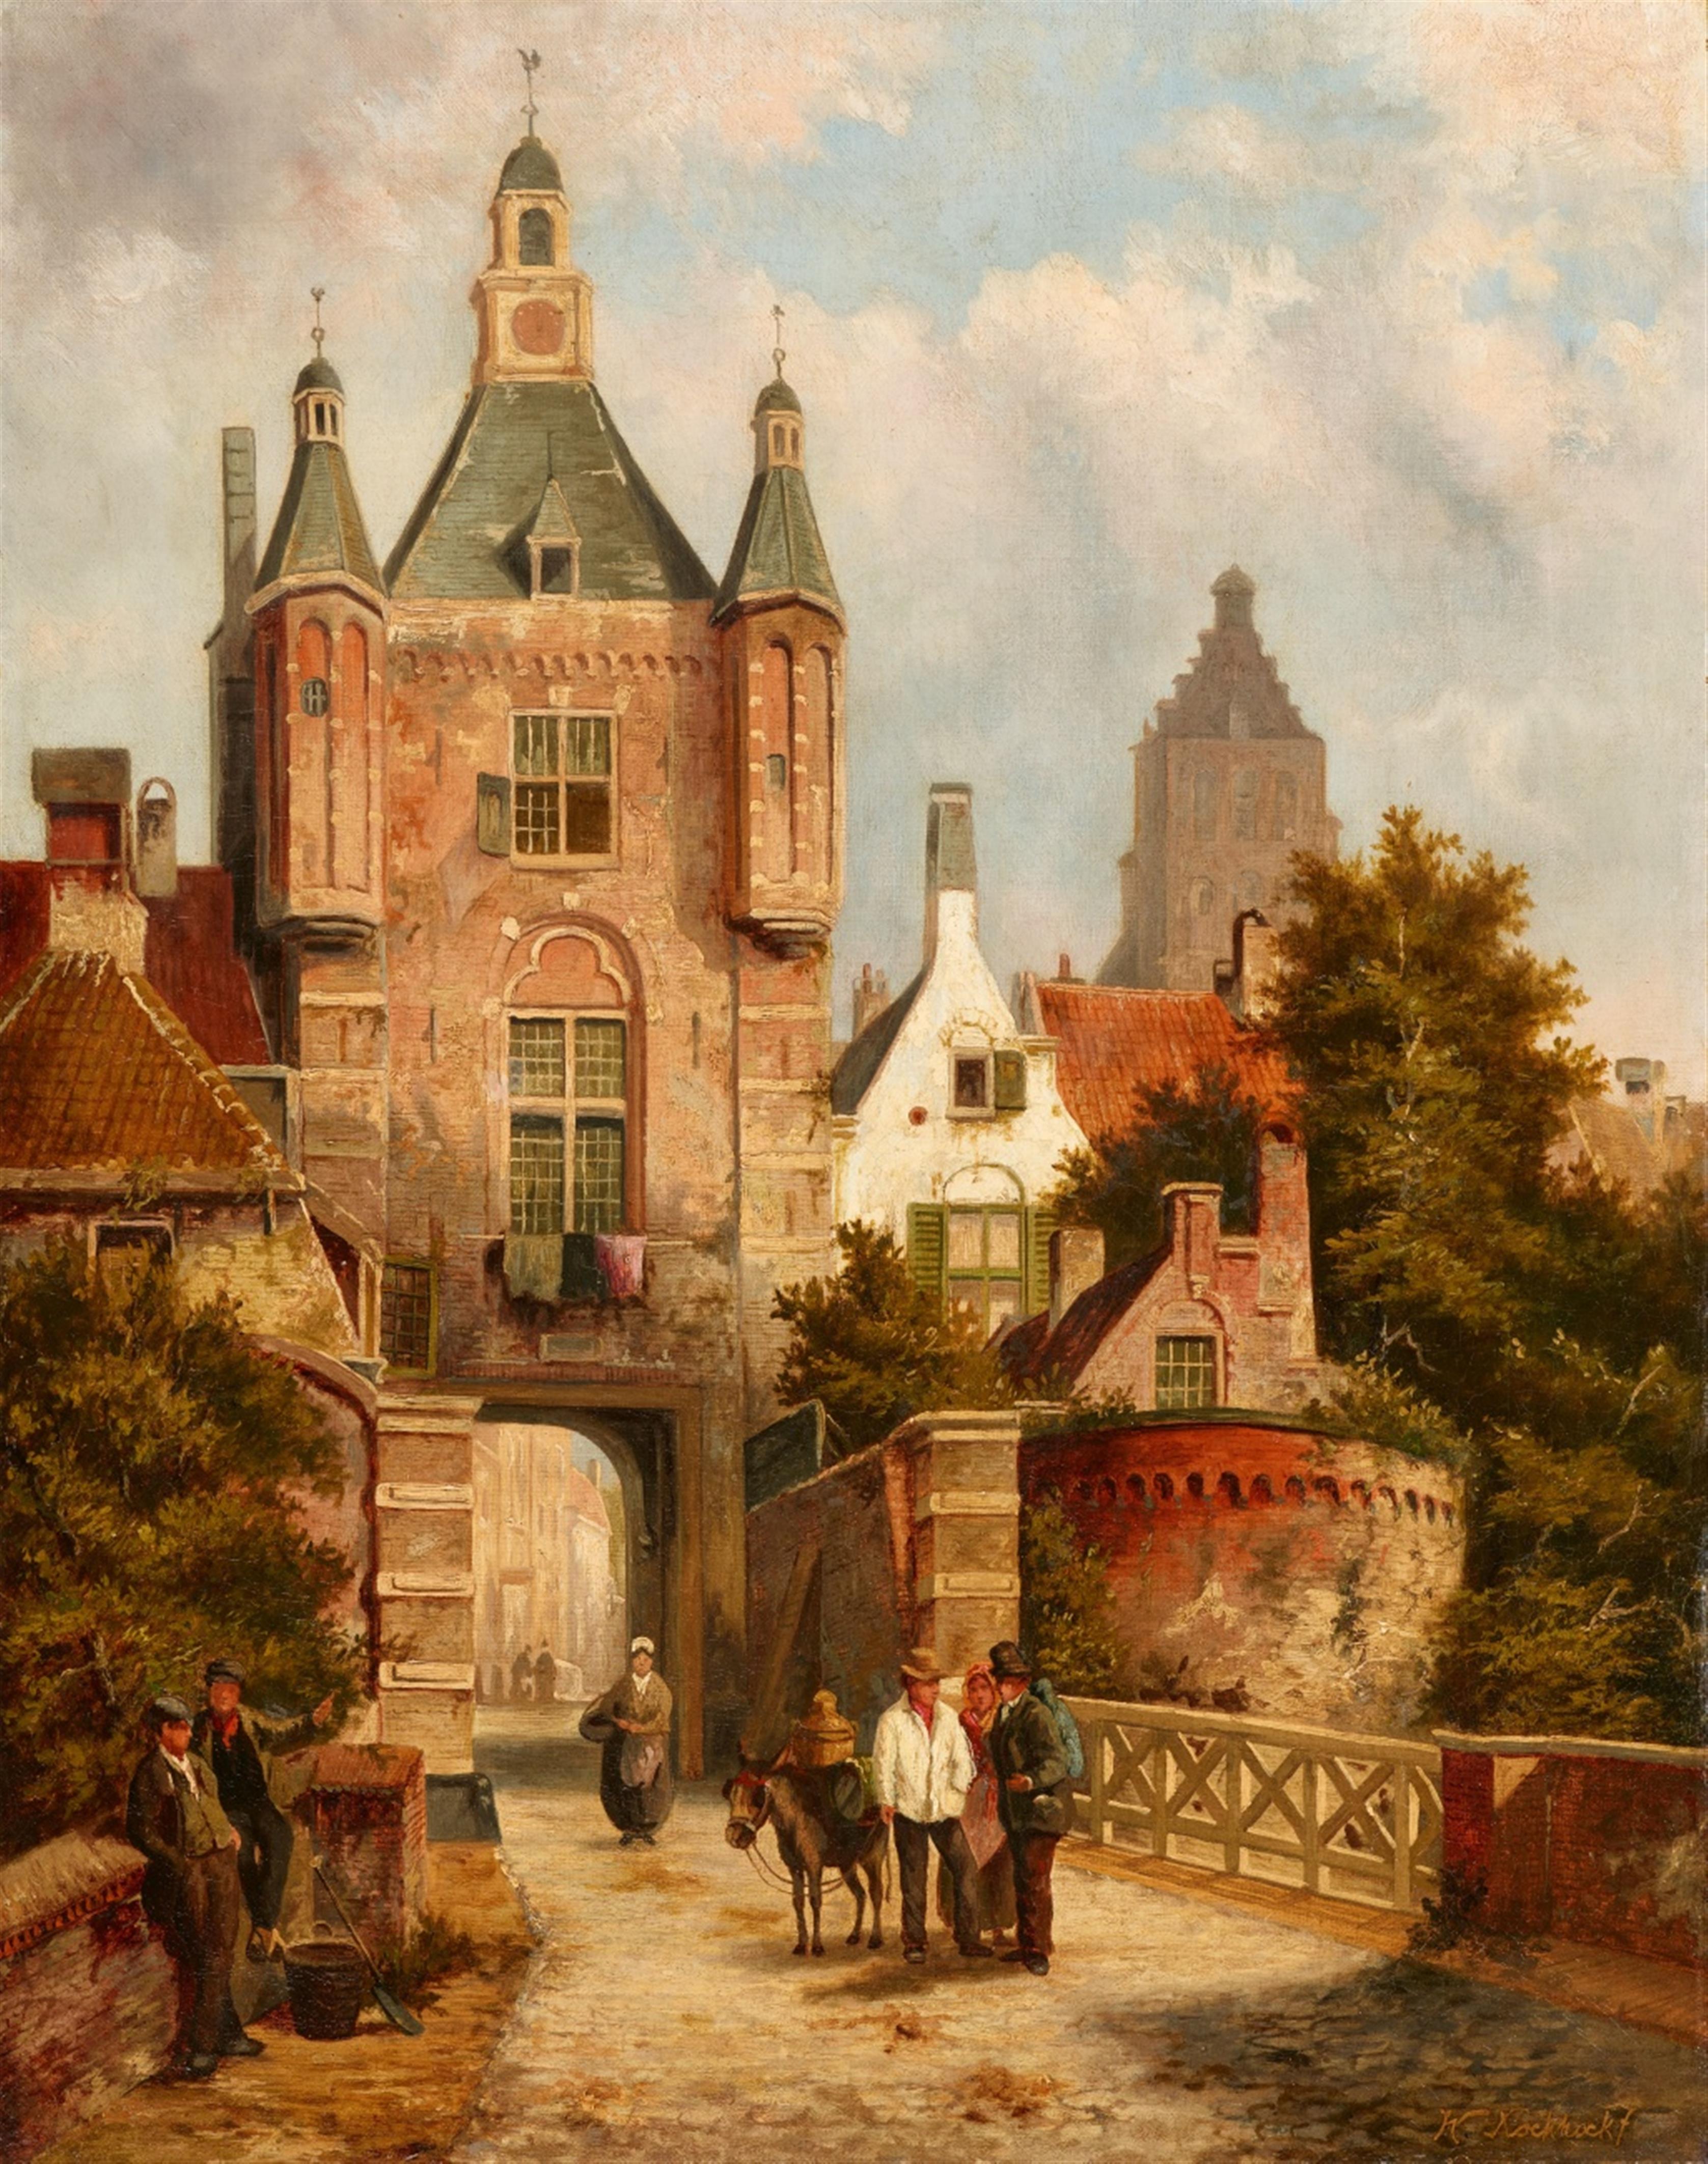 Willem Koekkoek - View of a Dutch Town with a Bridge and Tower - image-1